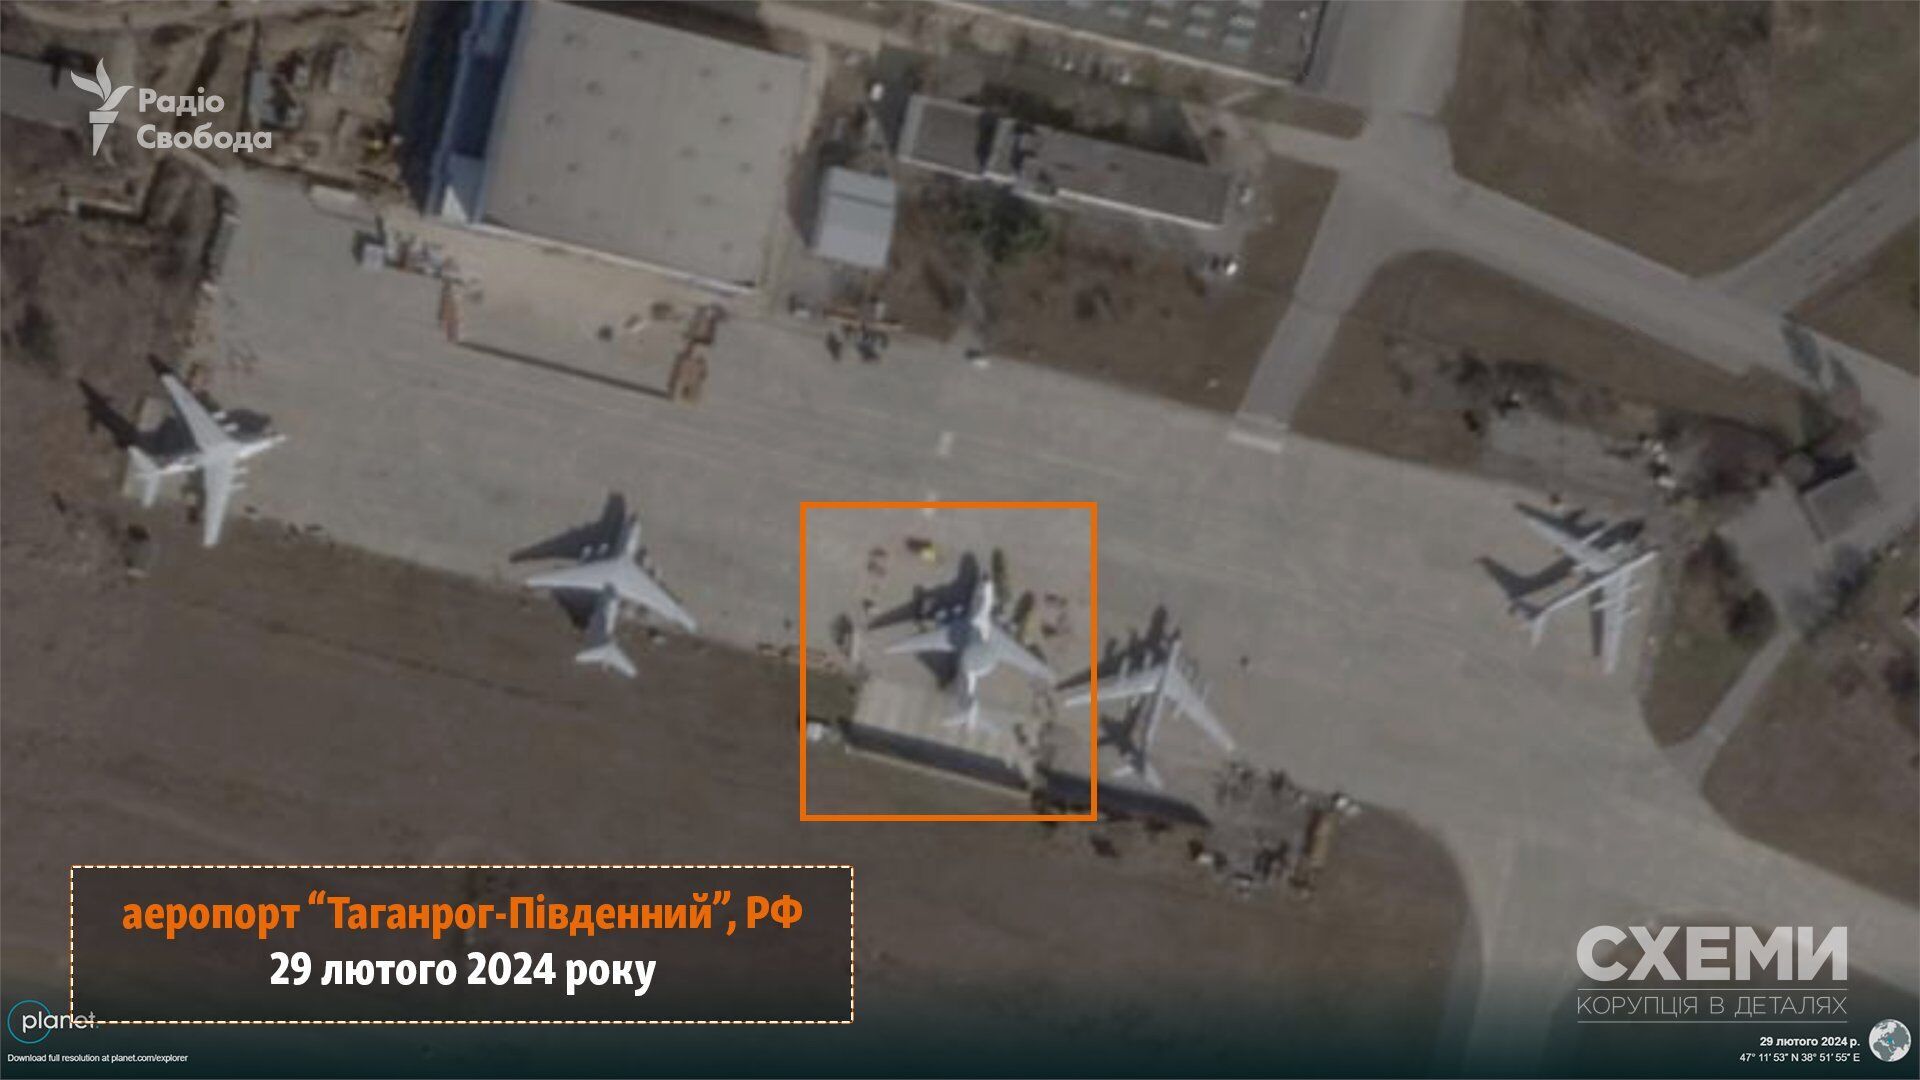 Just 130 kilometers from the front line: deployment site of another Russian A-50 aircraft discovered. Satellite photos